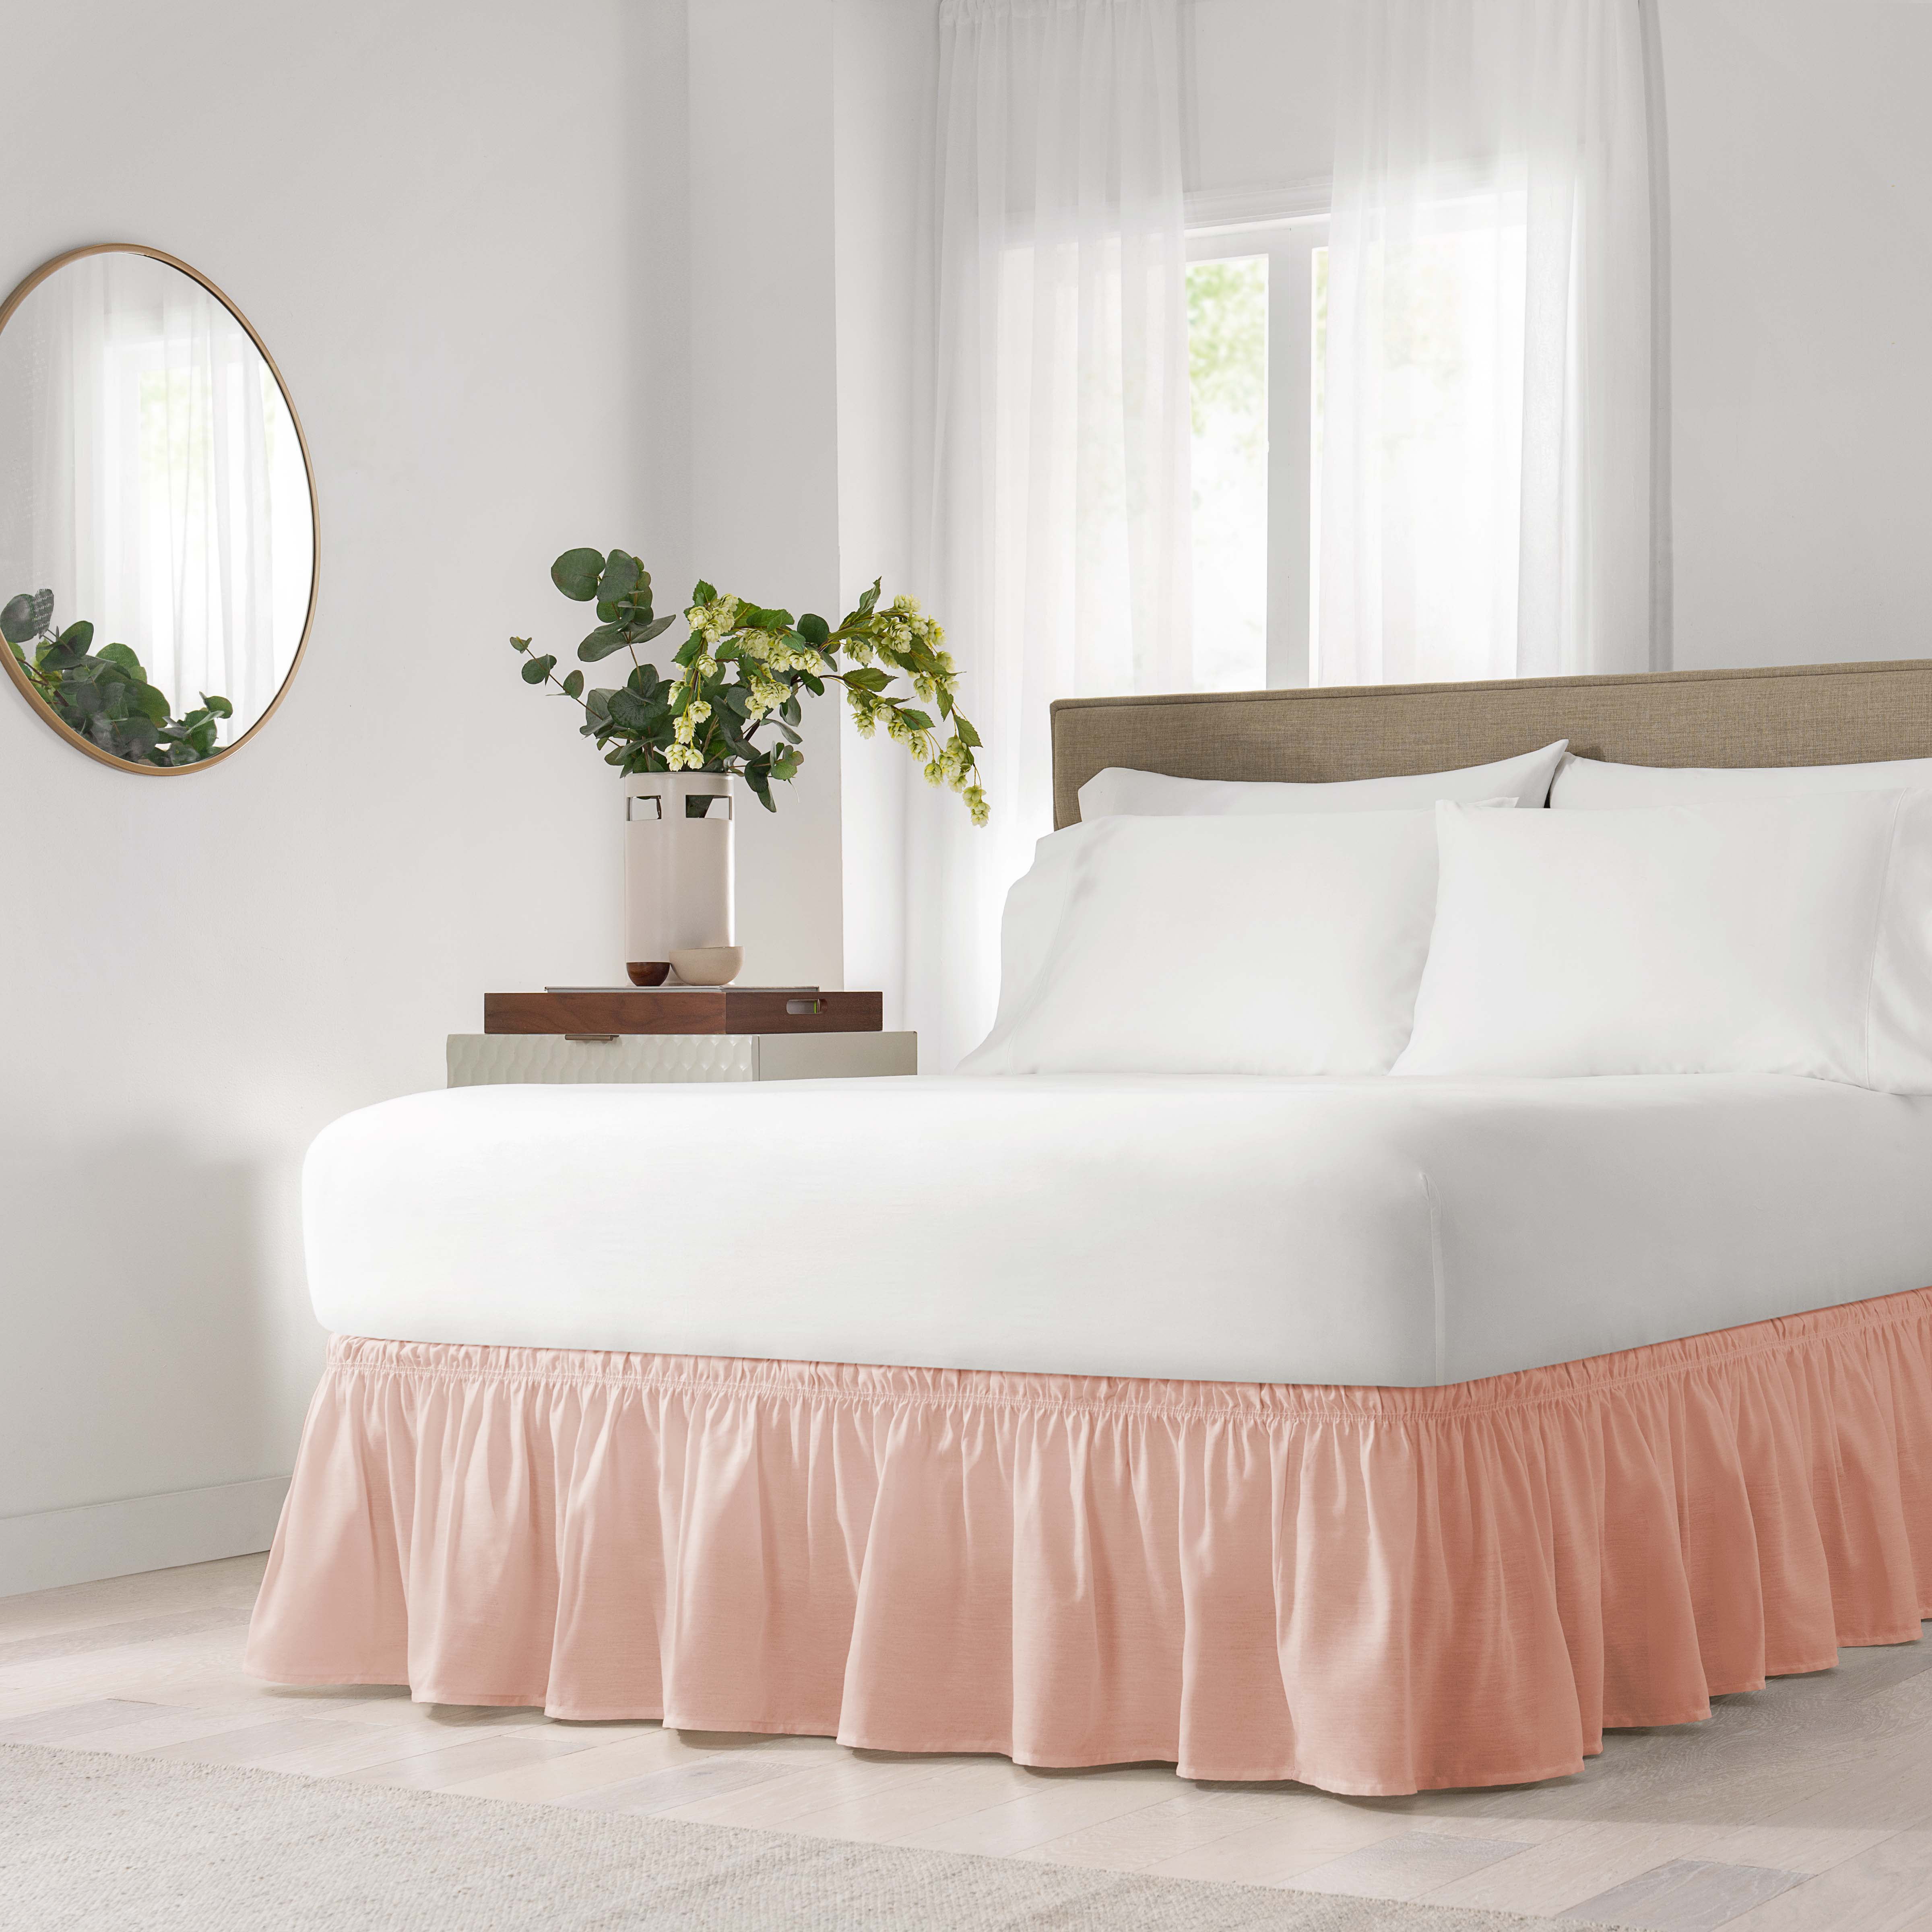 EasyFit Wrap Around Solid Ruffled Bed Skirt